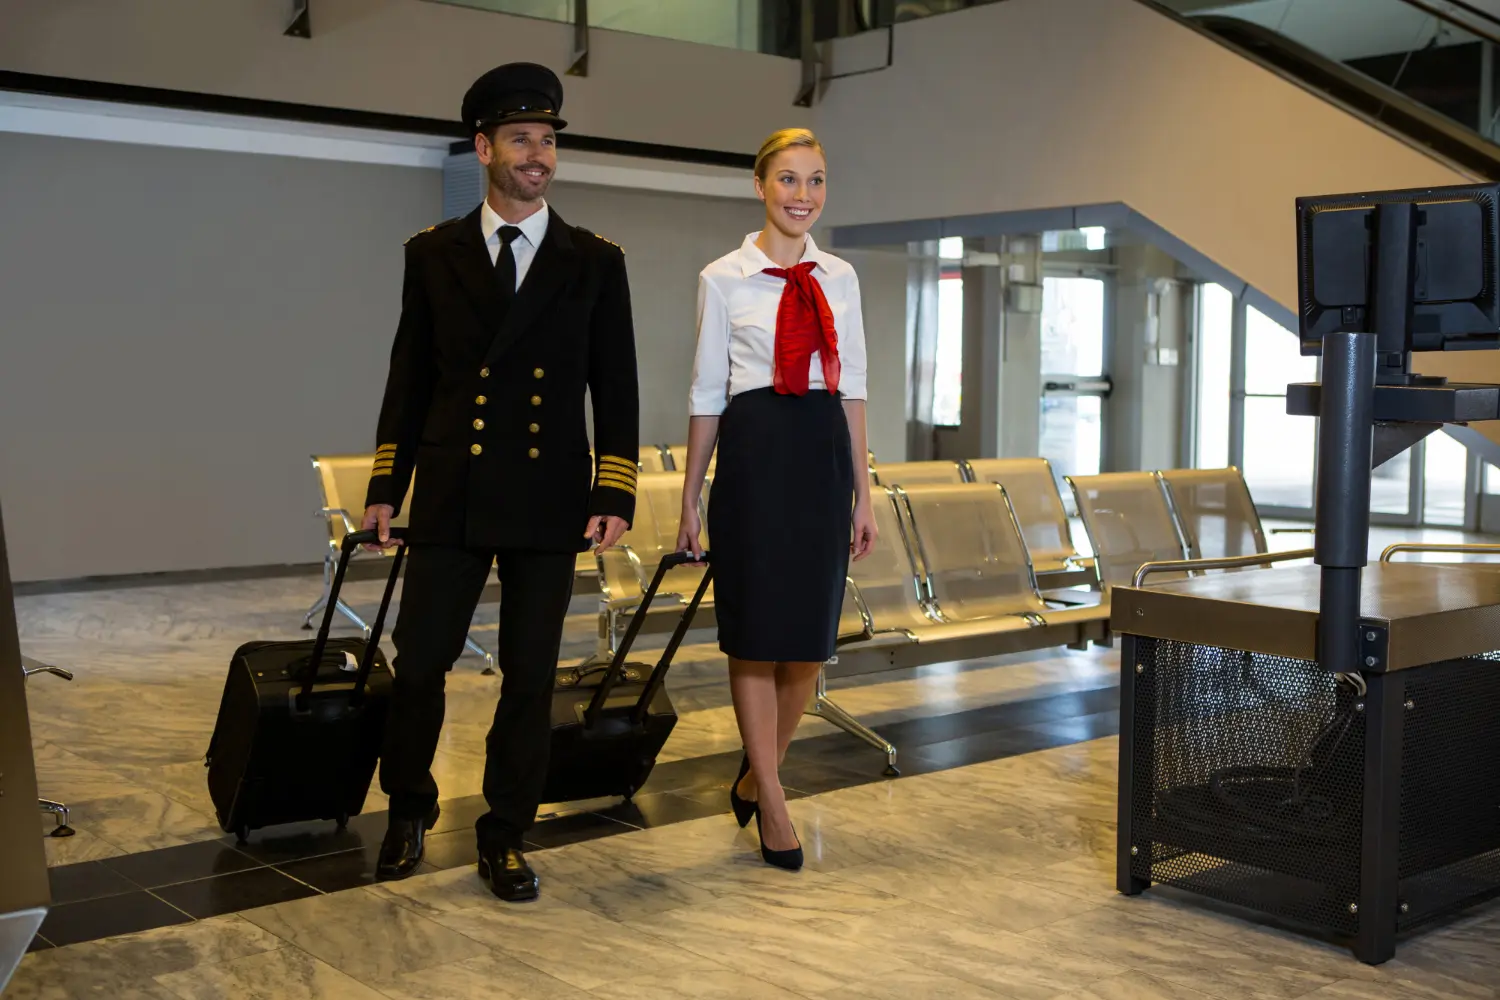 DIPLOMA IN CABIN CREW & AIRPORT GROUND SERVICES